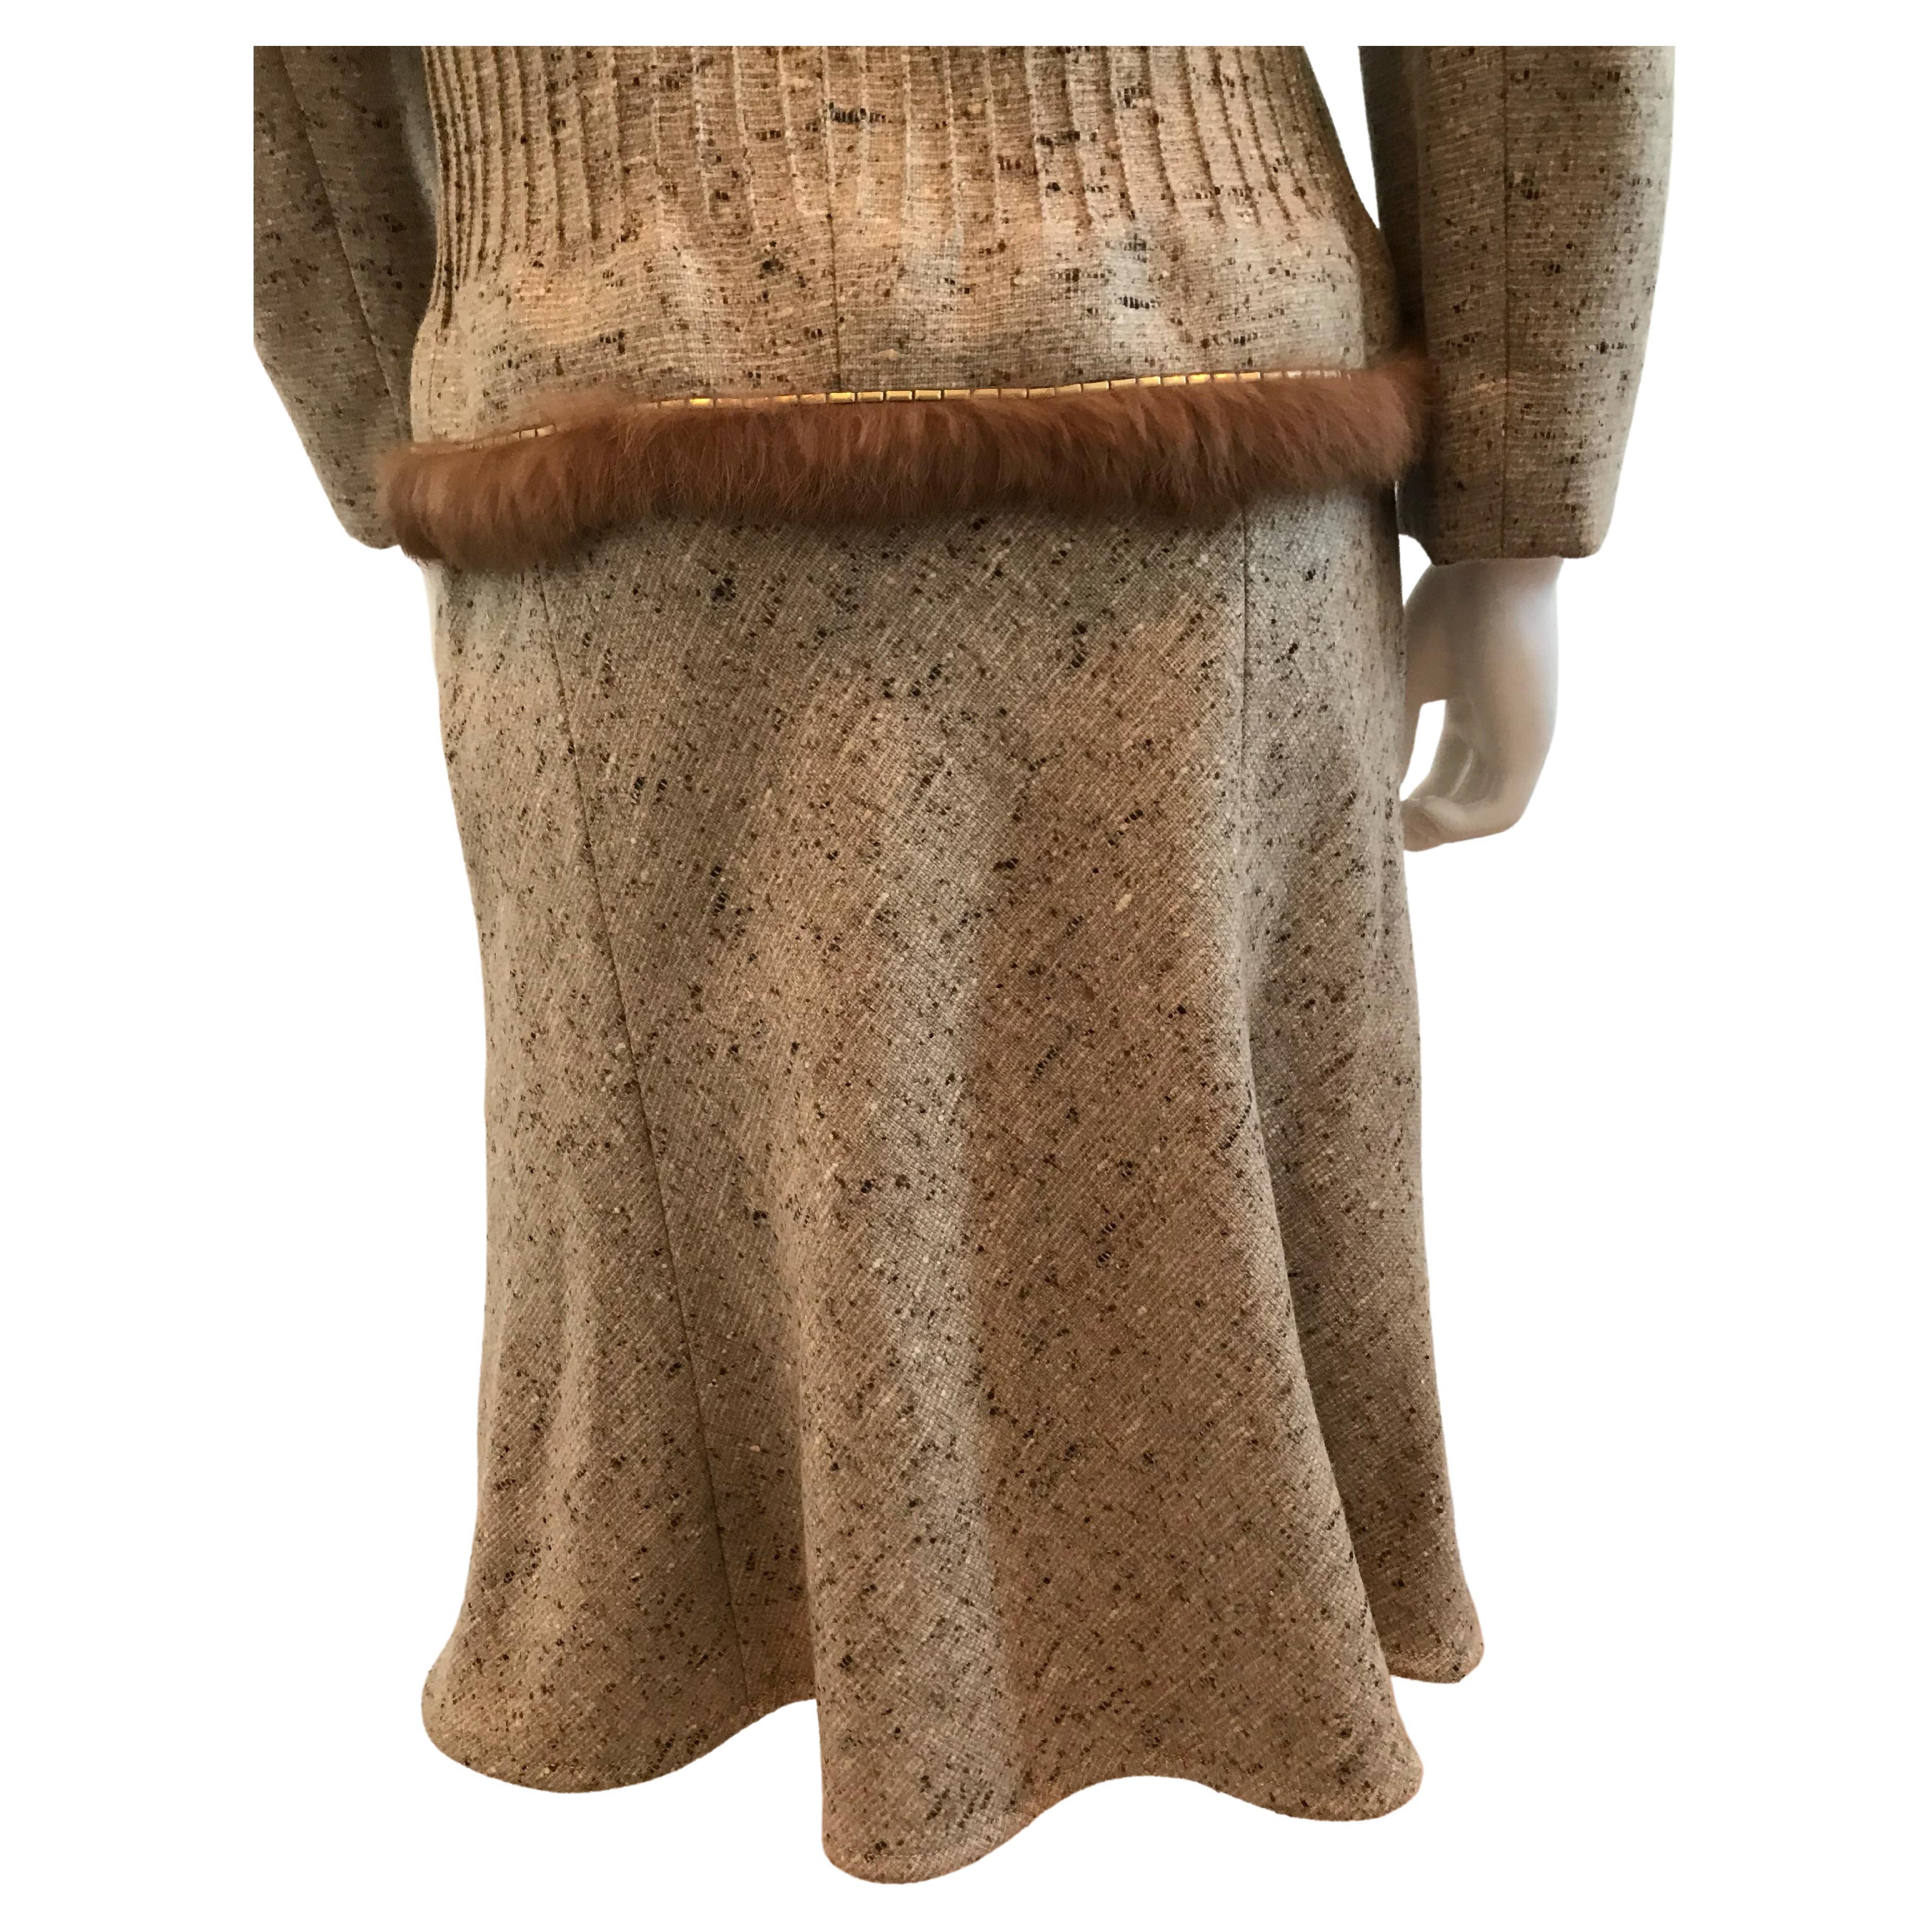 Valentino Jacket & Skirt Set with Fur Trim Size 8
Made in Italy
Silk Lining

Please be mindful that this piece has led a previous life, and may tell its story through minor imperfection. Purchasing this item continues its narrative, so you can be